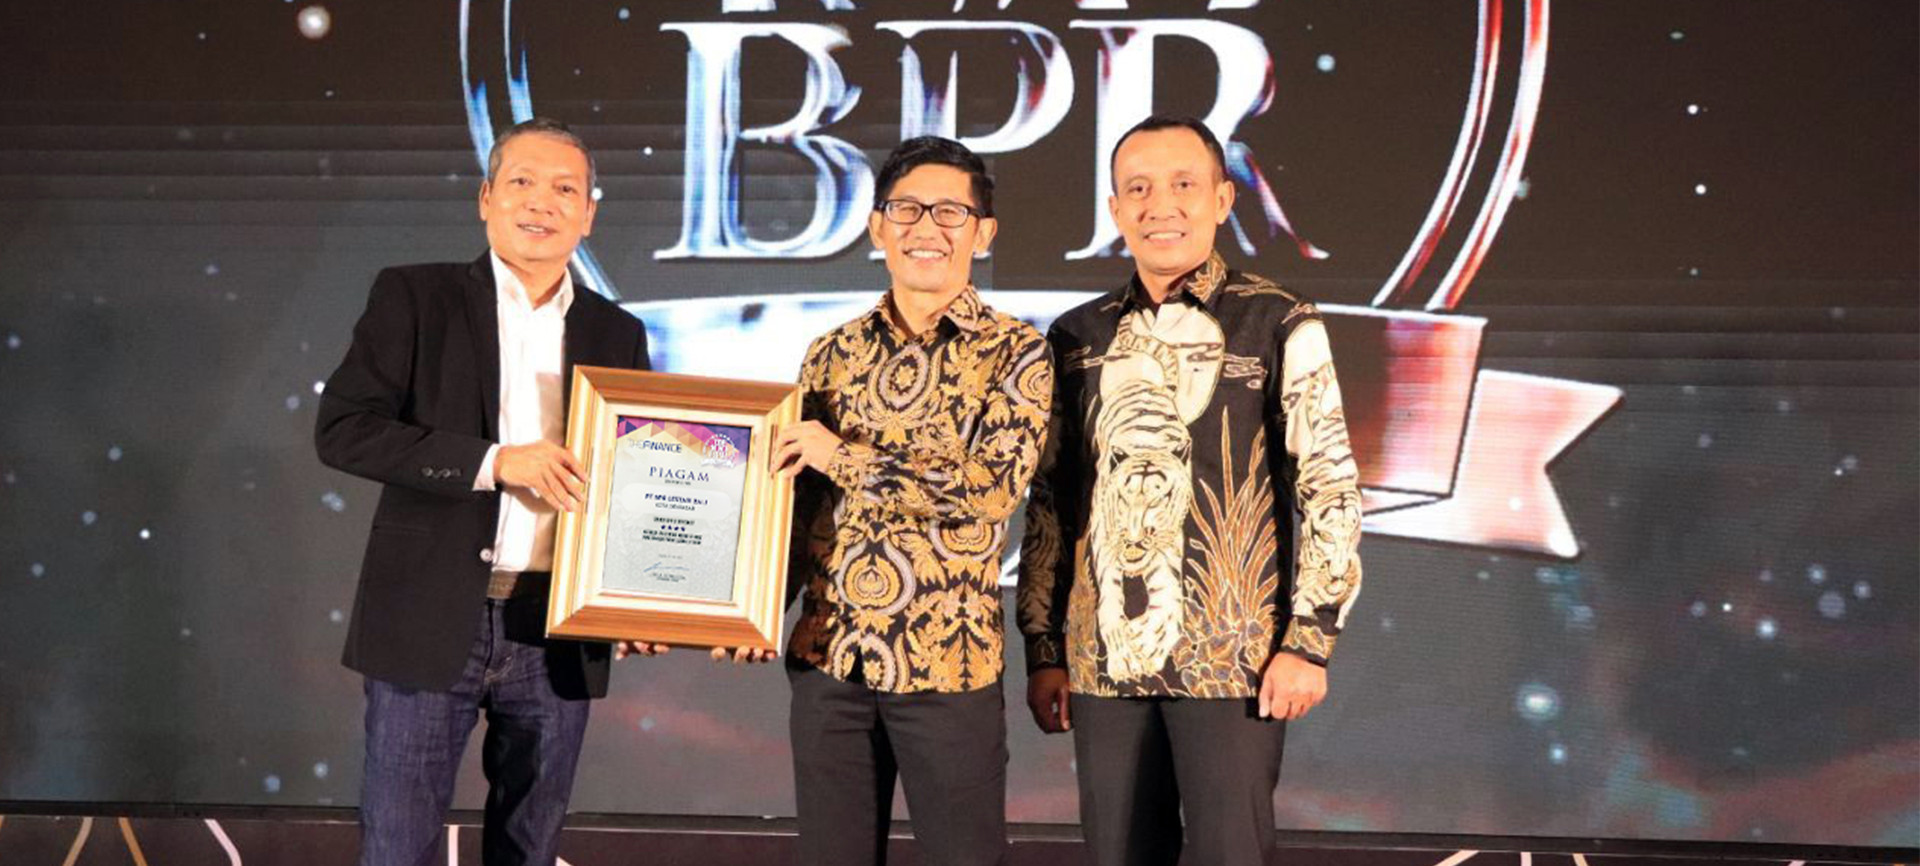 Awarded Top 100 BPR 2022, BPR Lestari Bali Committed to Improve Services